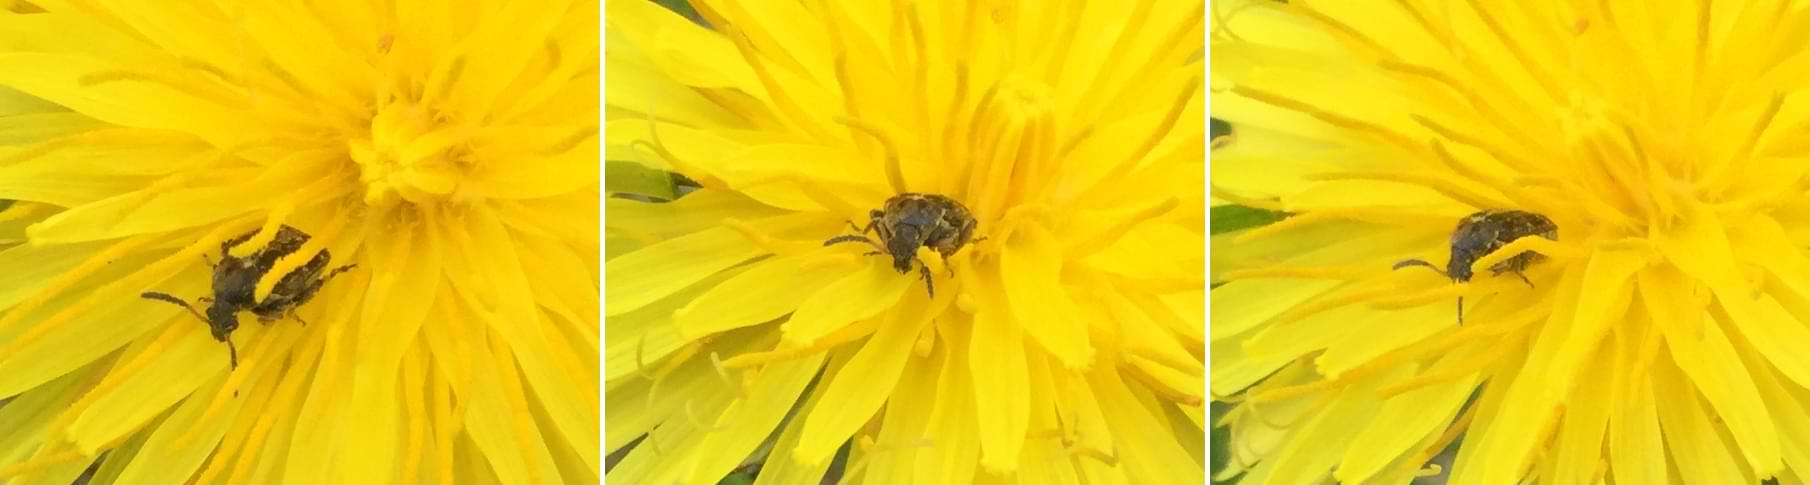 Three photos of a tiny beetle hiding in a bright yellow dandelion head.